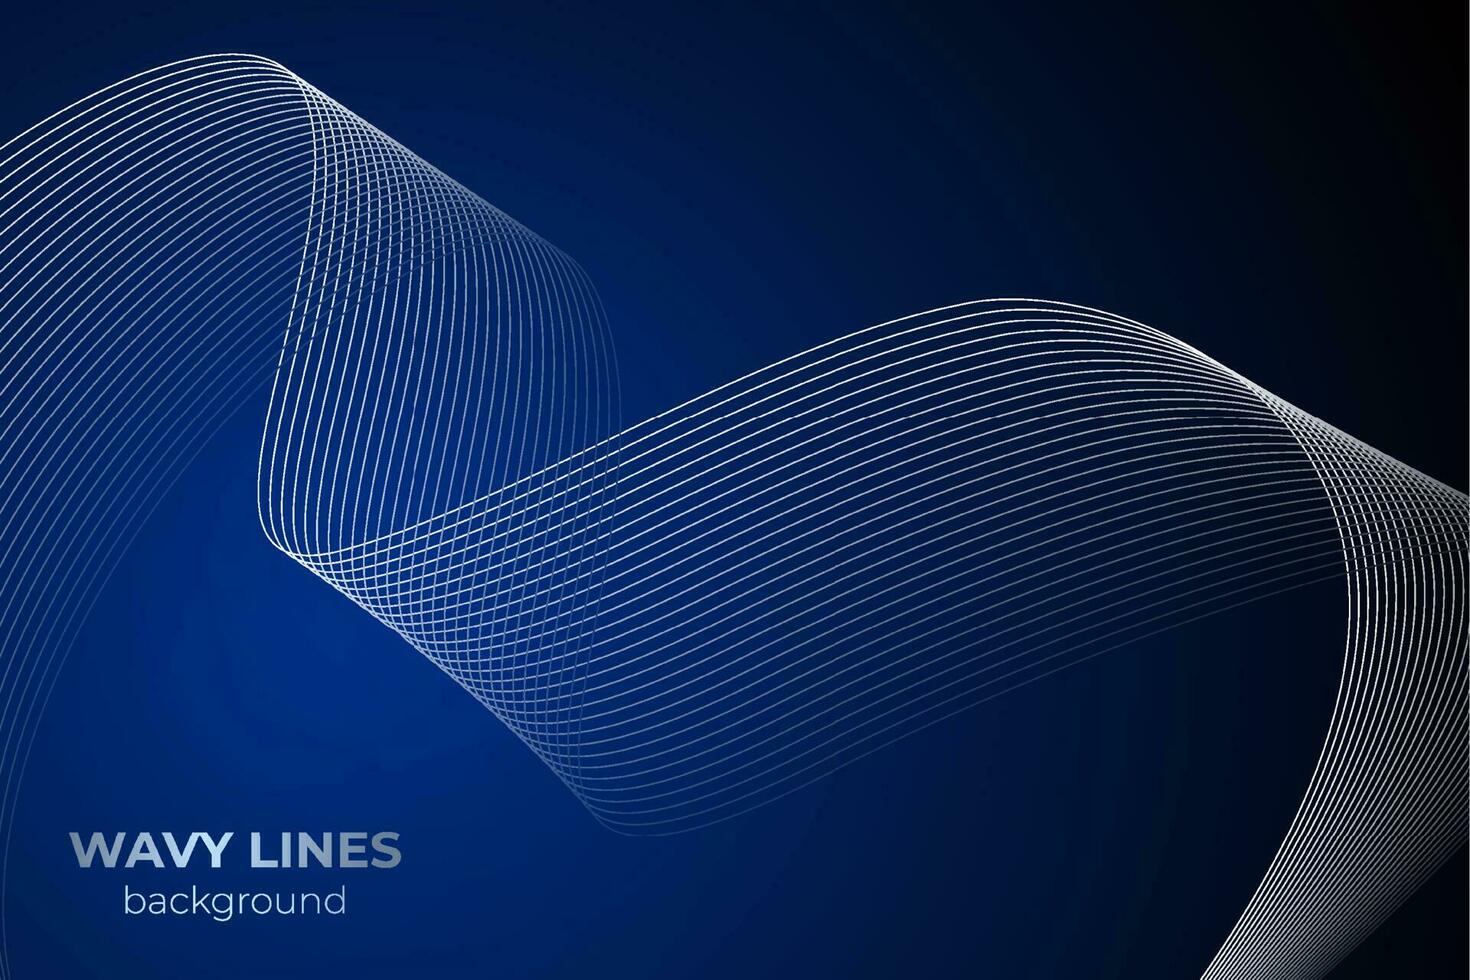 Abstract wavy lines background in vector design